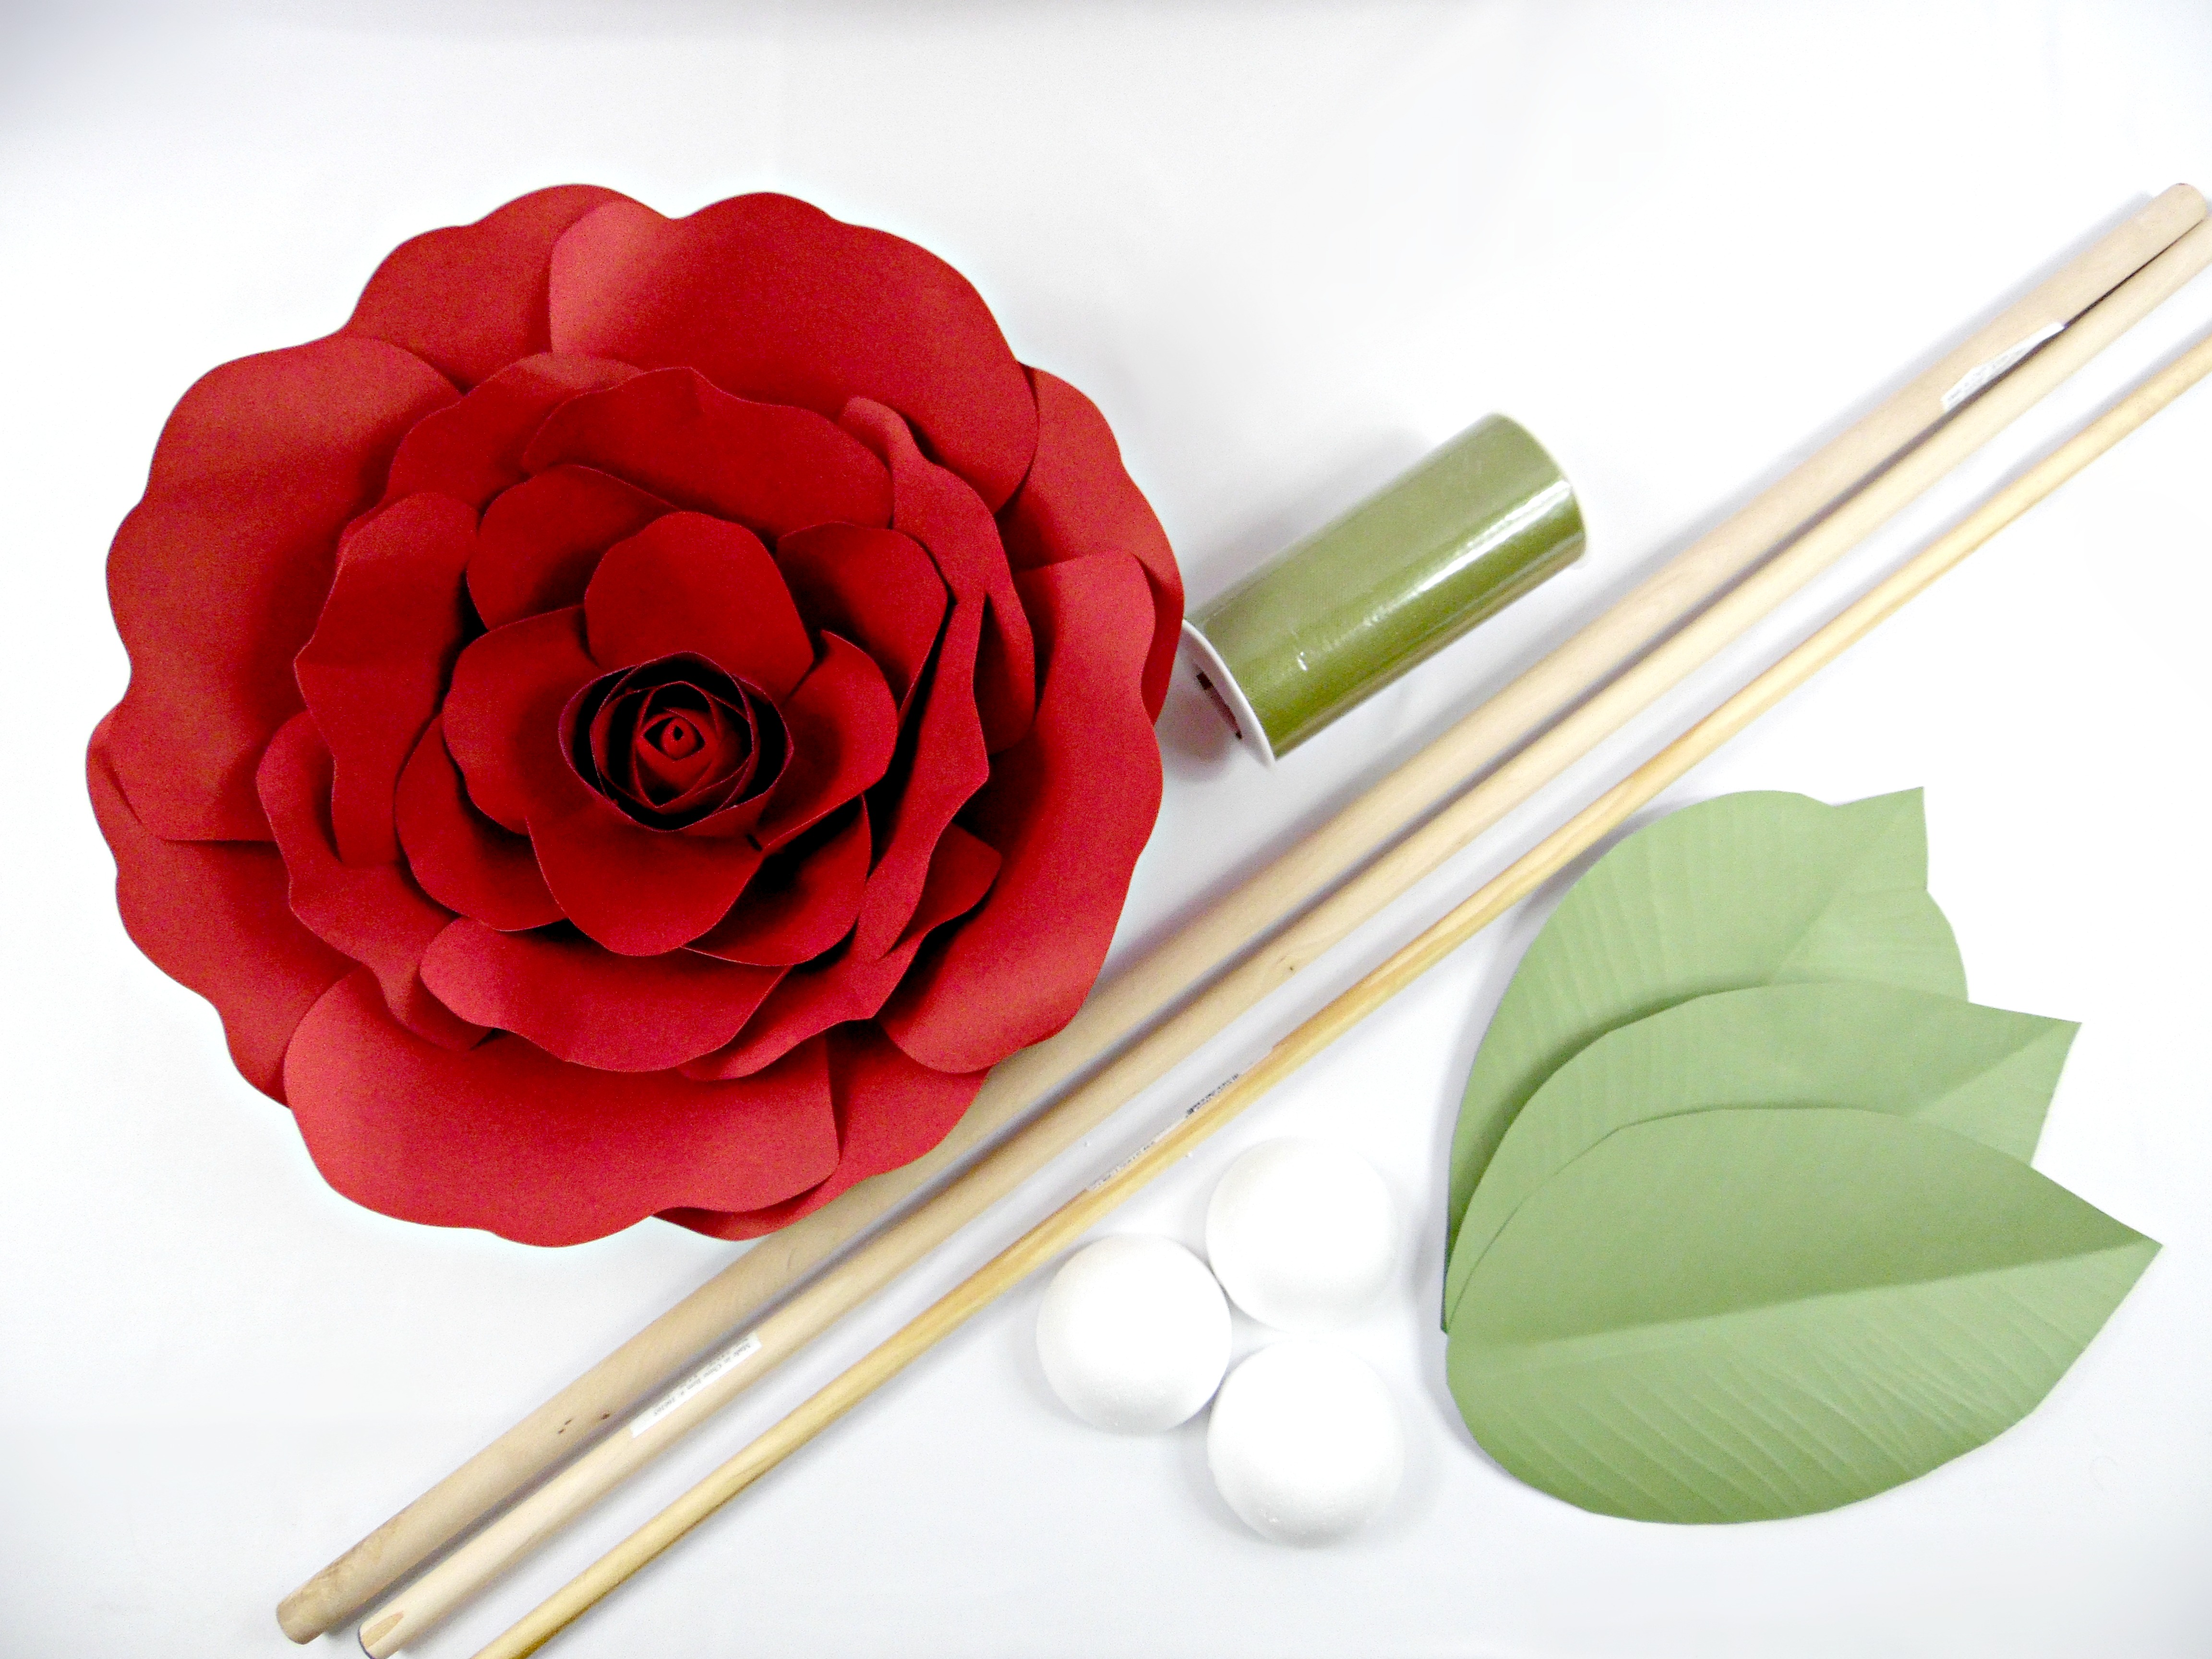 All the supplies needed to make giant paper flower stems: paper flower, leaves, dowel, foam balls, and tulle or paint. 